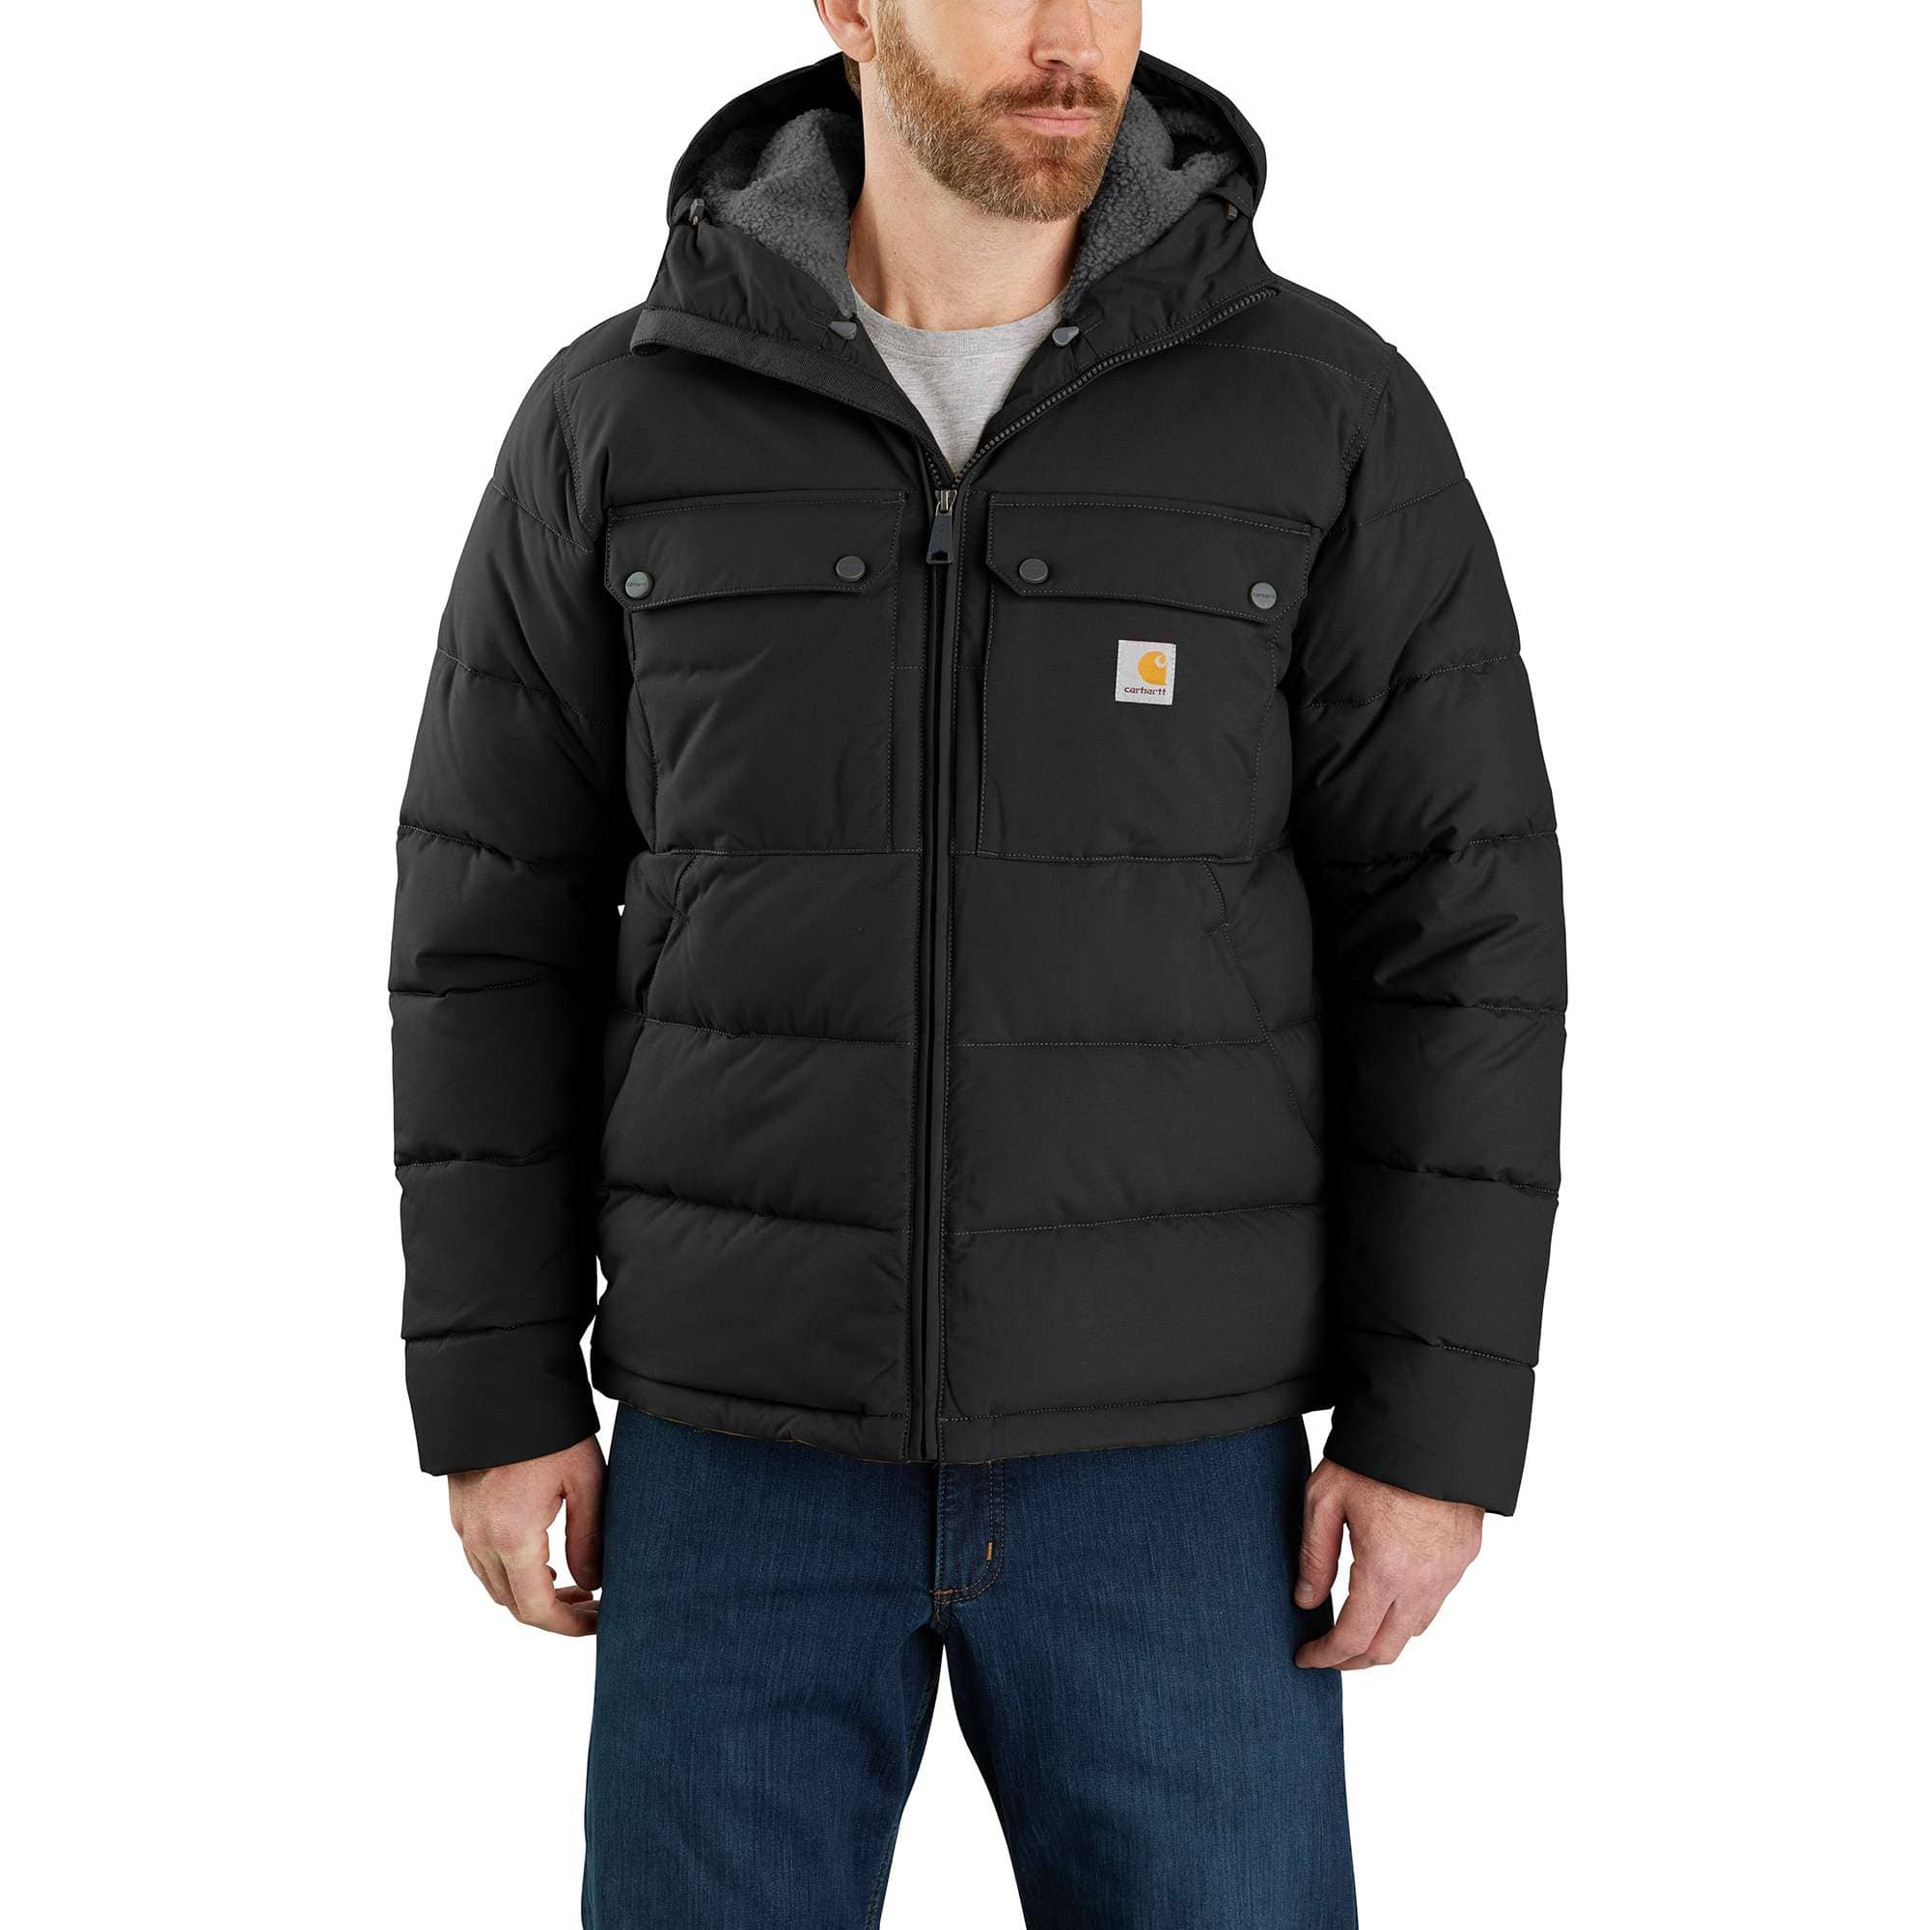 Montana Loose Fit Insulated Jacket - 4 Extreme Warmth Rating